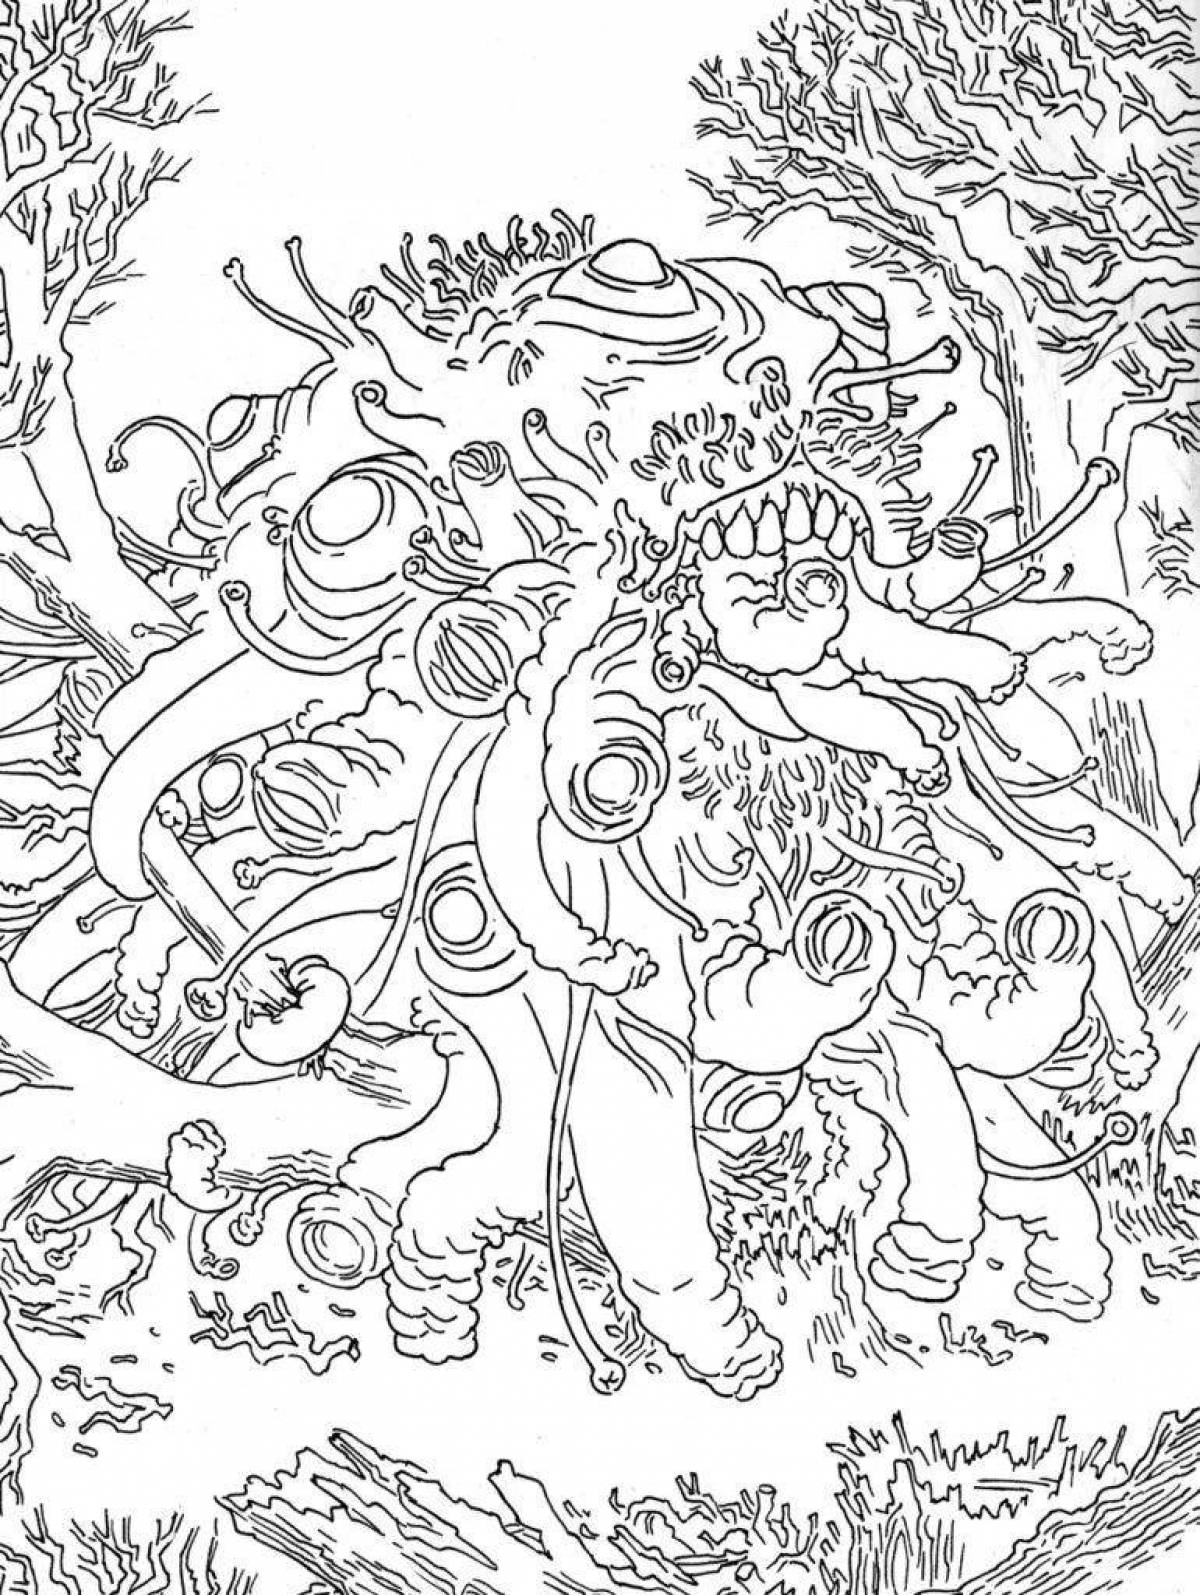 Nasty and nasty horror coloring book